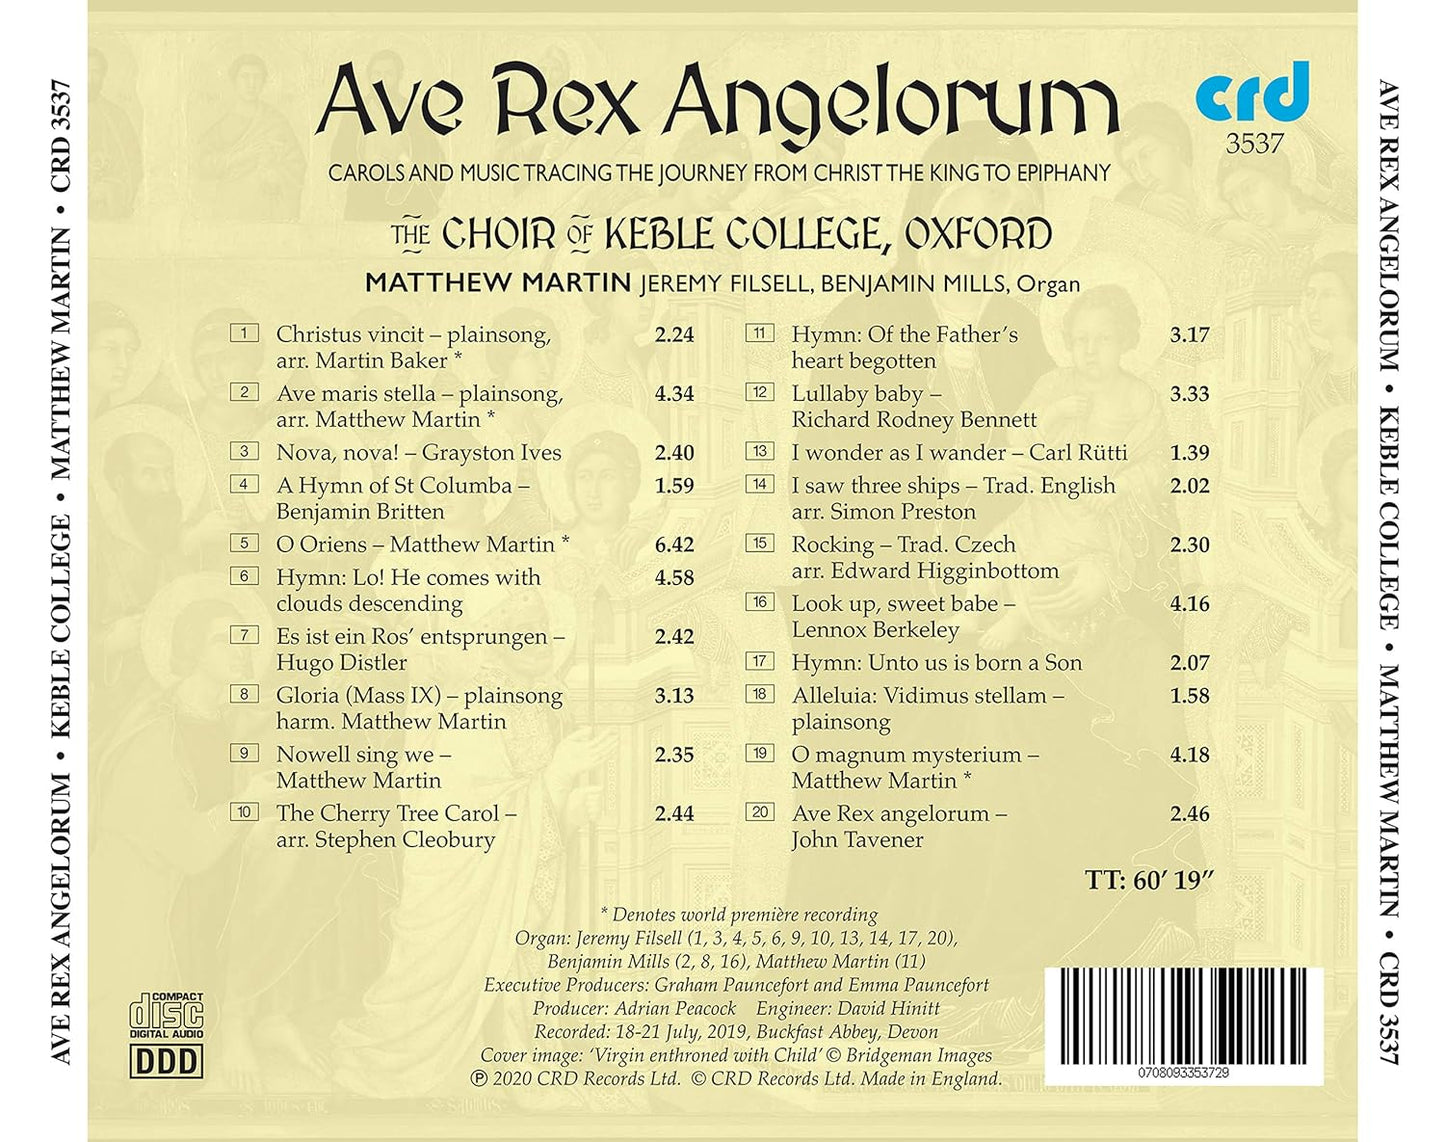 AVE REX ANGELORUM: CAROLS AND MUSIC TRACING THE JOURNEY FROM CHRIST THE KING TO EPIPHANY: CHOIR OF KEBLE COLLEGE, OXFORD